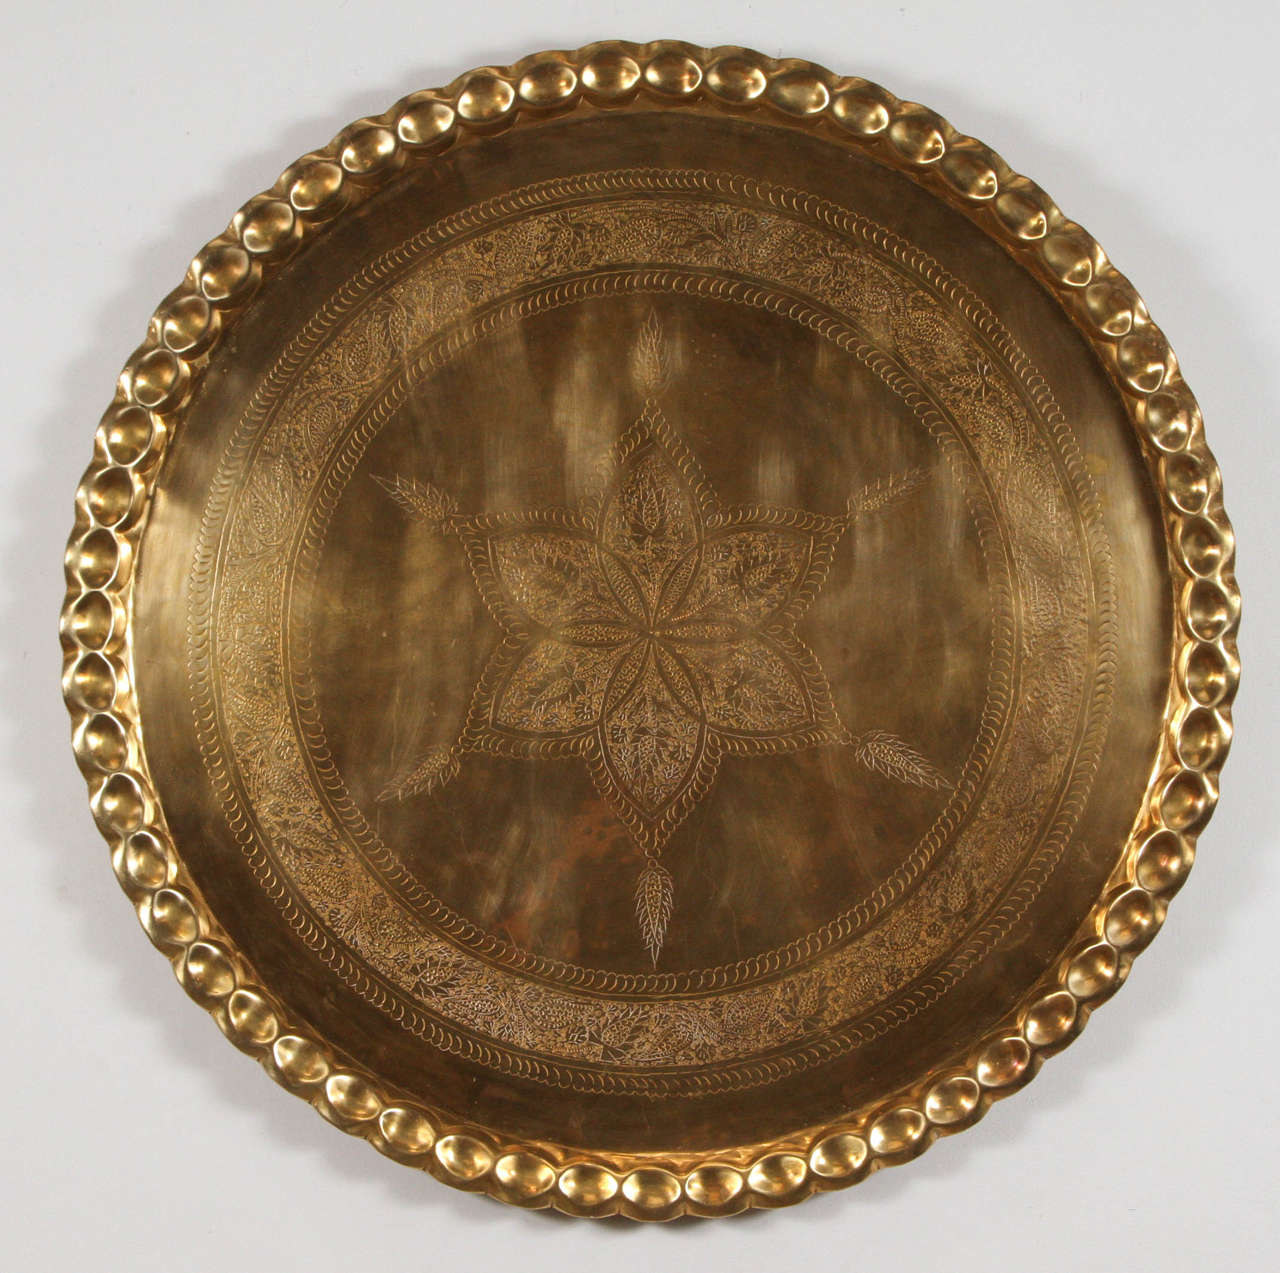 Large 36" diameter, heavy solid polished brass tray platter, 
Fabulous Moroccan brass tray, could be used as a decorative Middle Eastern piece hanging on the wall, or as a brass tray on an ottoman or table.
The brass tray is delicately hand